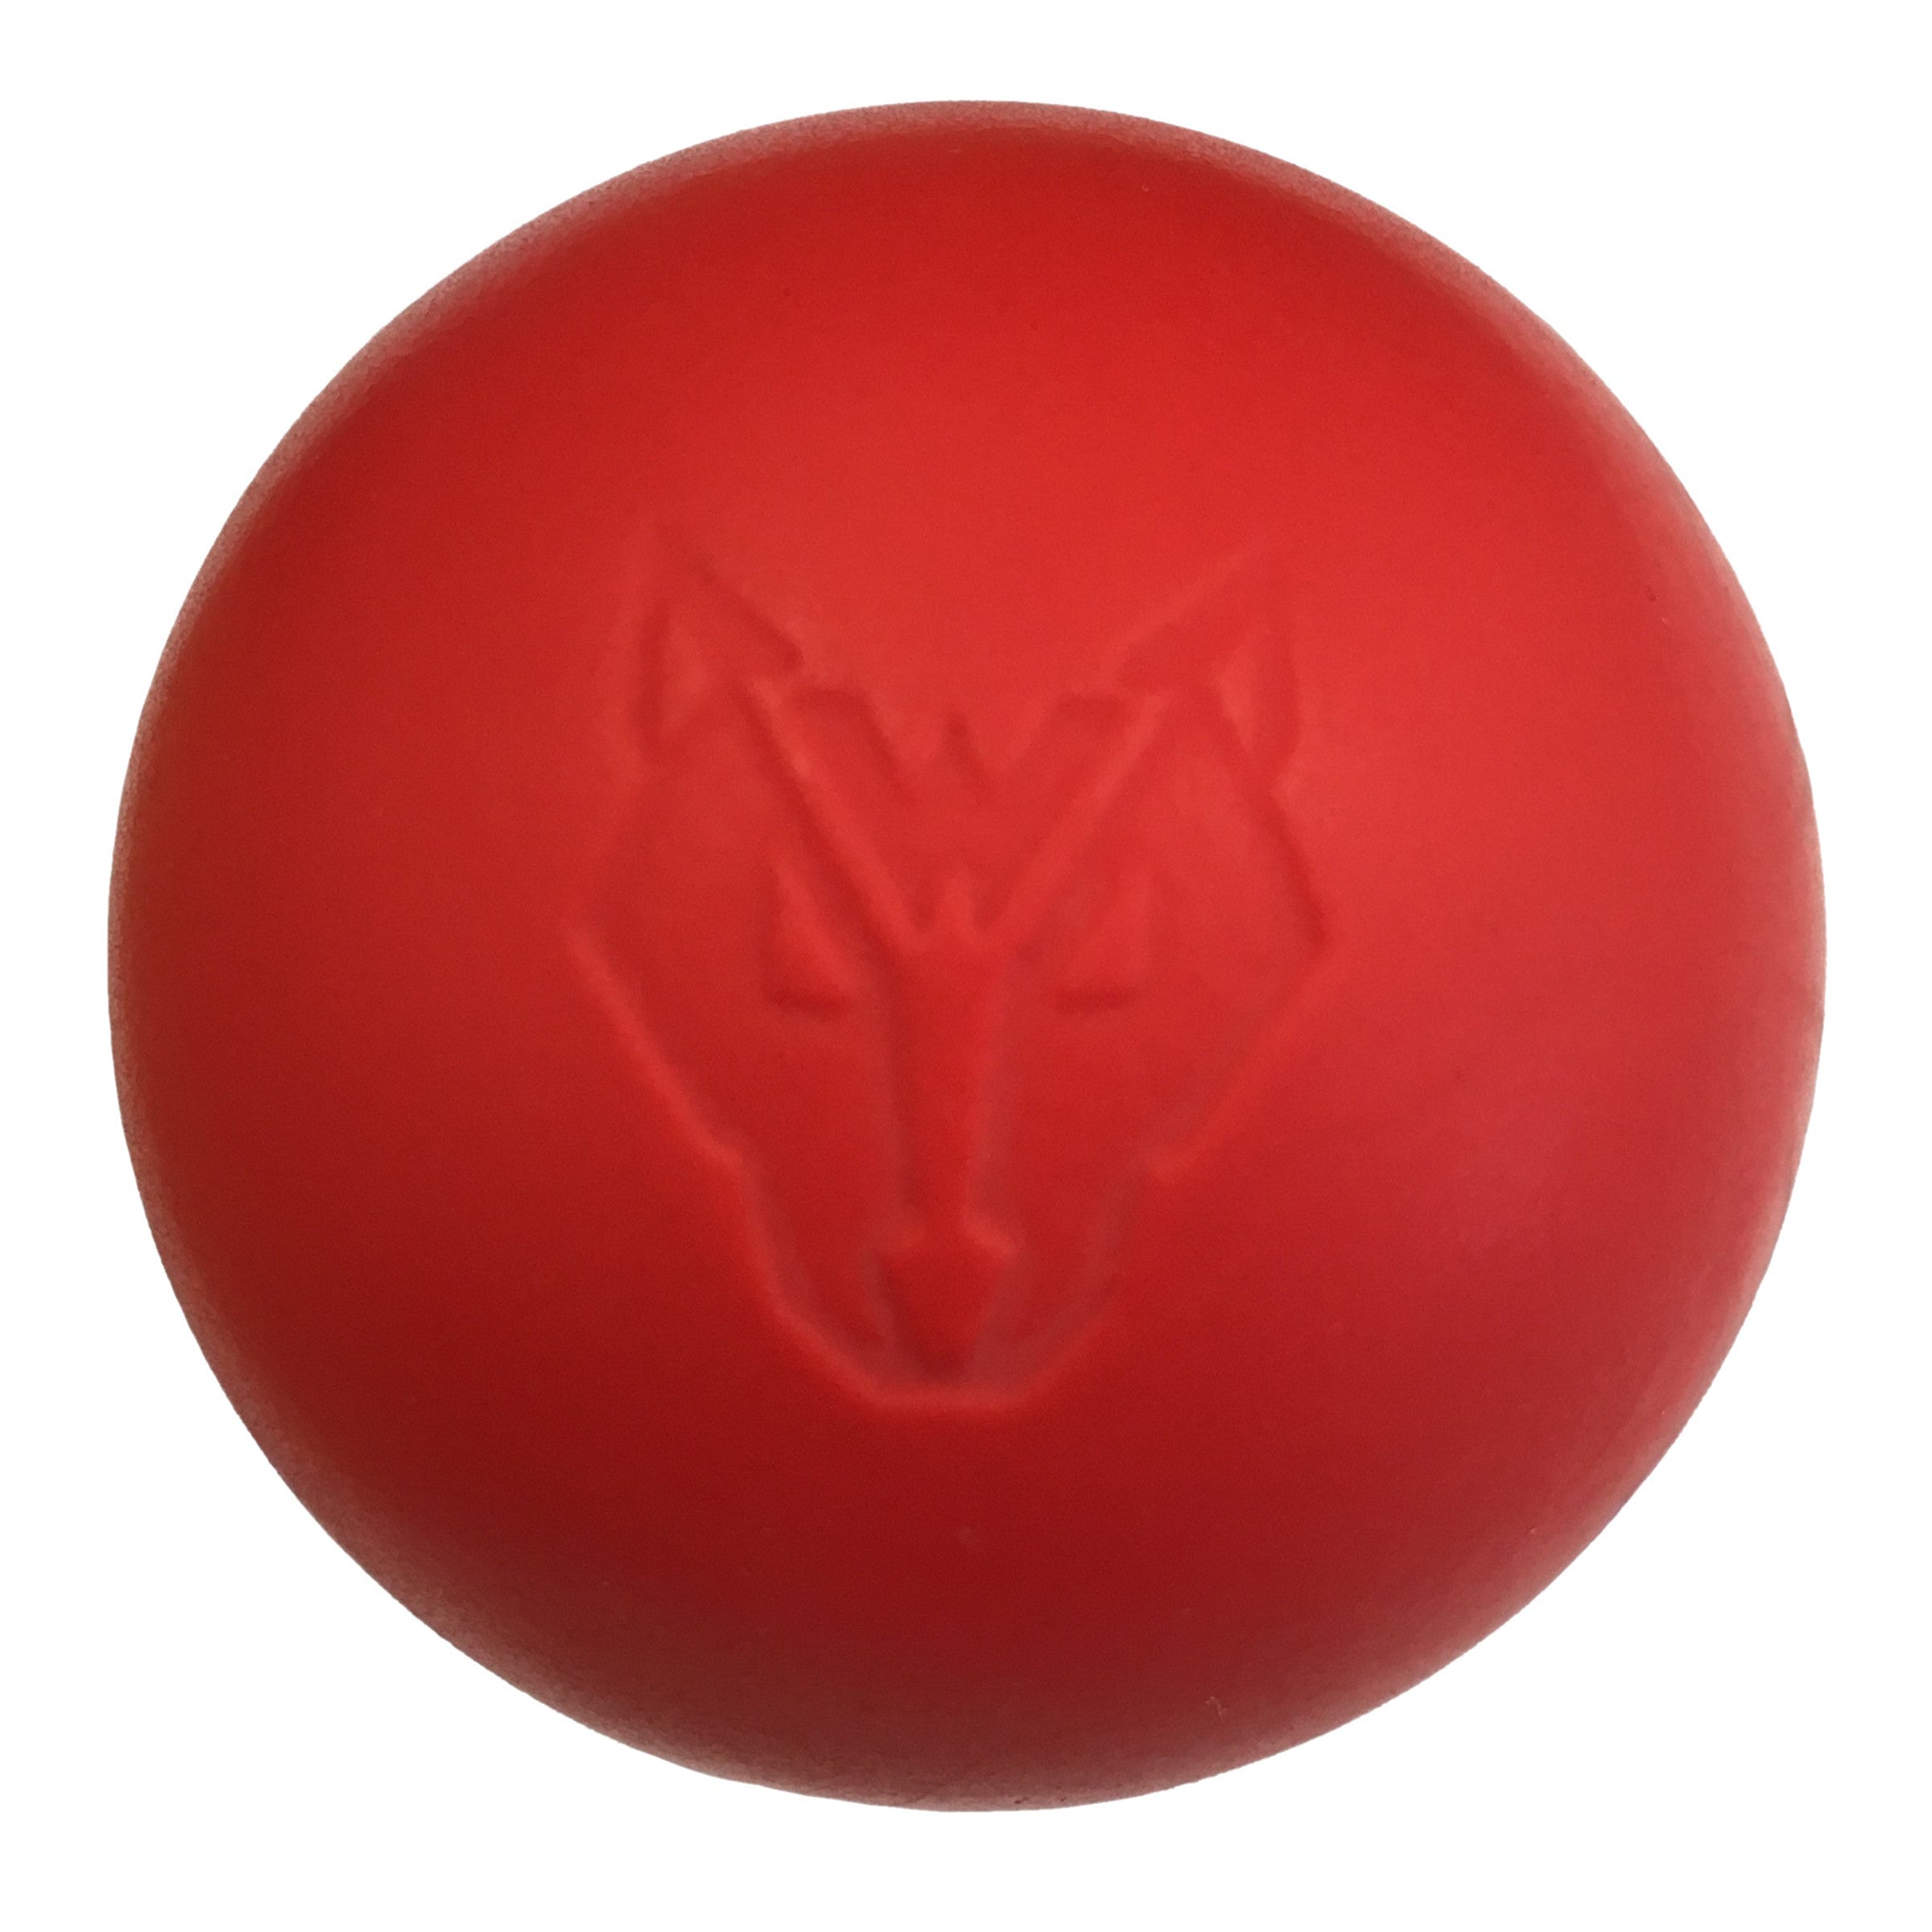 Lacrosse balls / Myofascial release / Mobility tool - Wolverson Fitness